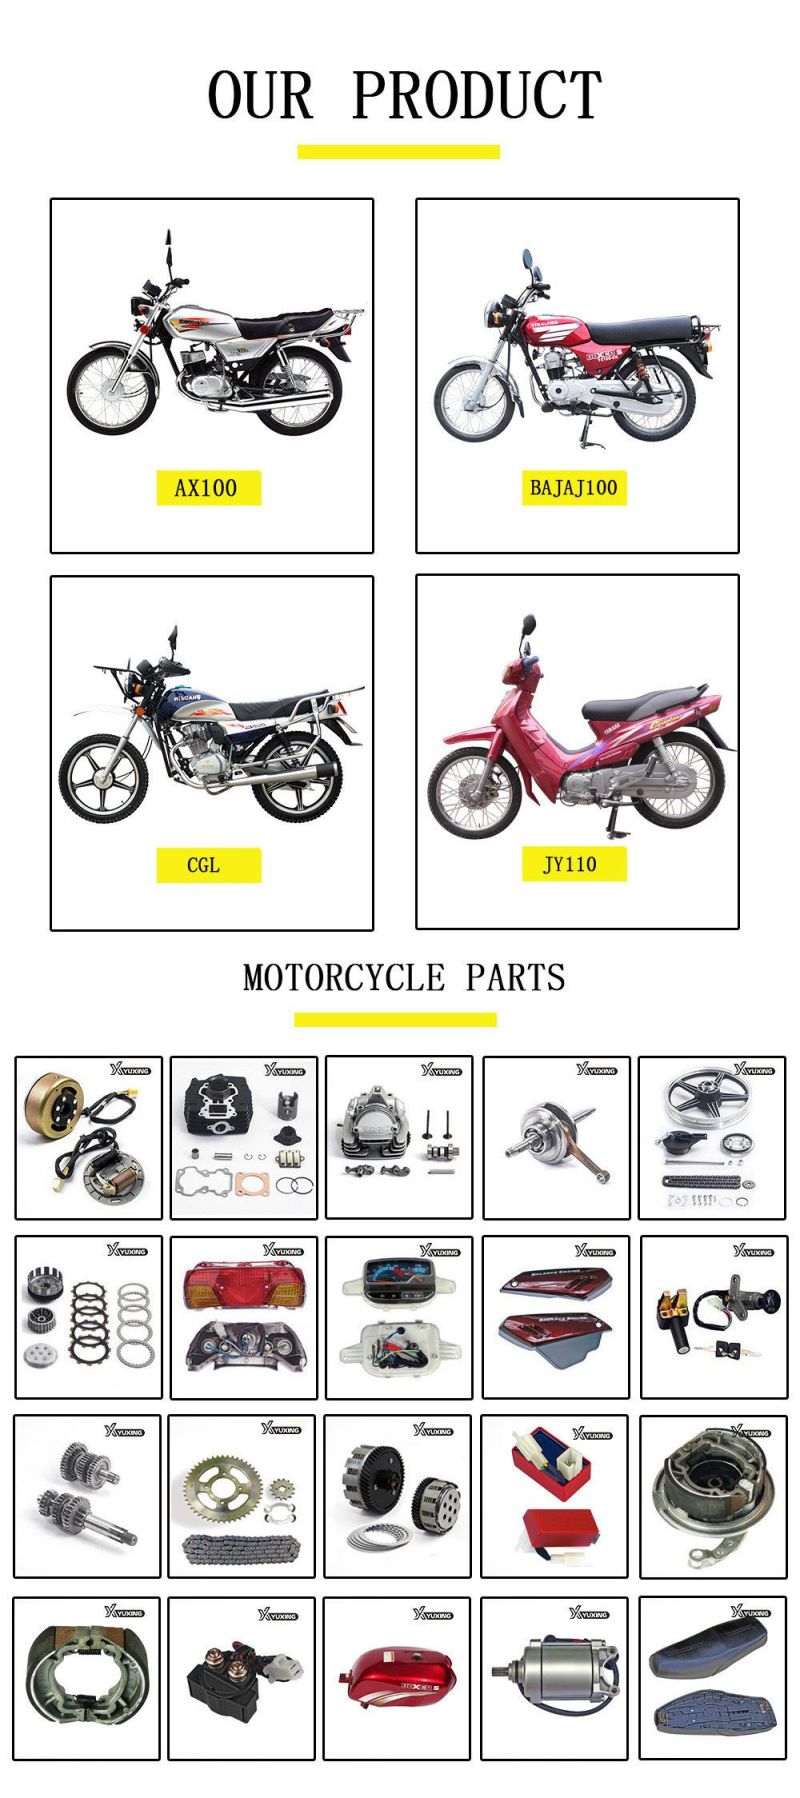 Factory Price Motorcycle Spare Parts Maintenance-Free Mf12V9-2A 12V9ah Motorcycle Battery for Motorbike